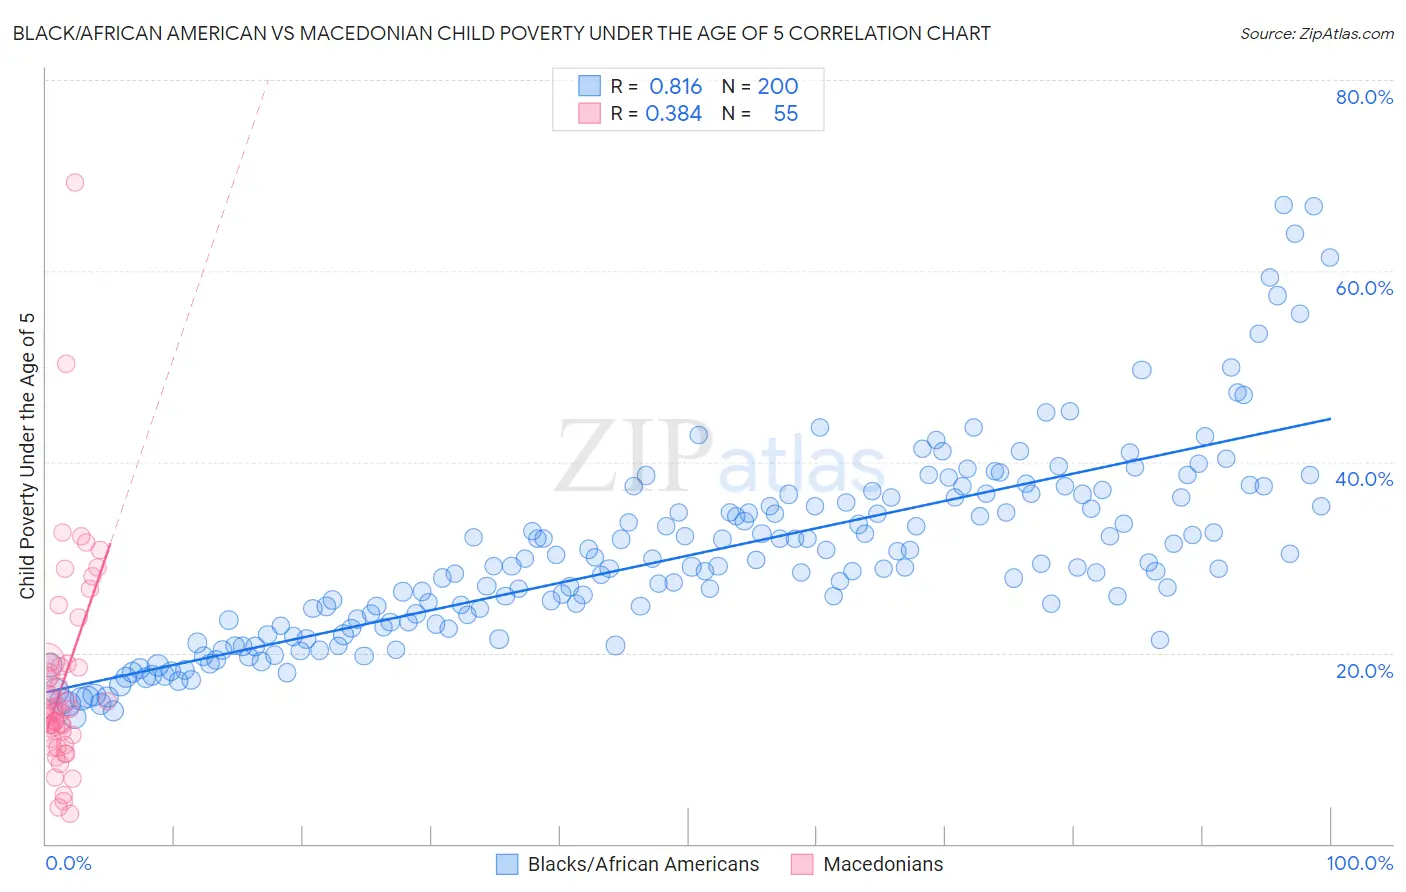 Black/African American vs Macedonian Child Poverty Under the Age of 5